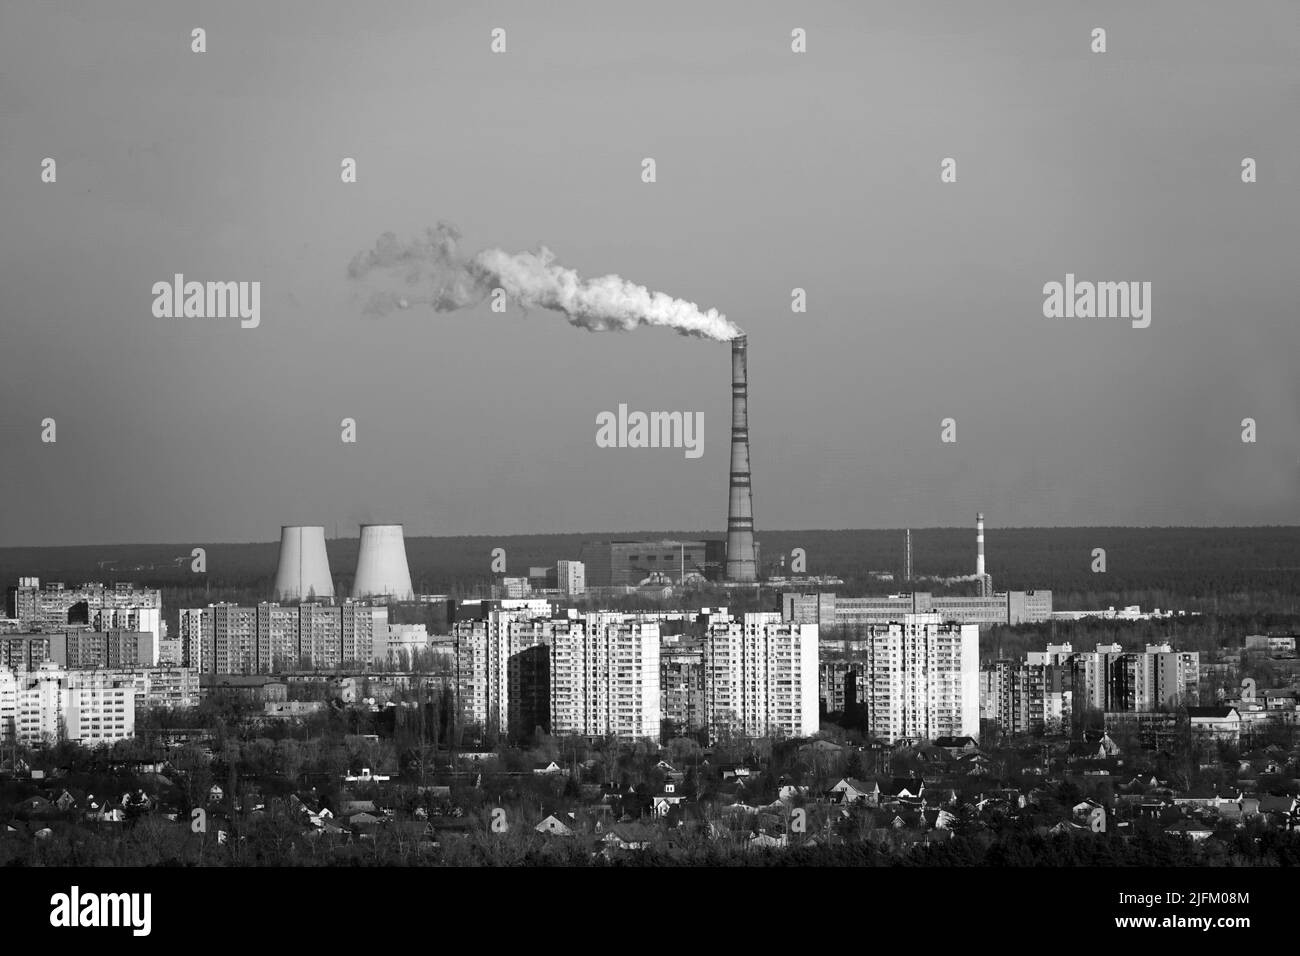 Kiev, Ukraine November 22, 2019: Pipes smoke, polluting the air in the city worsening the environment. Stock Photo